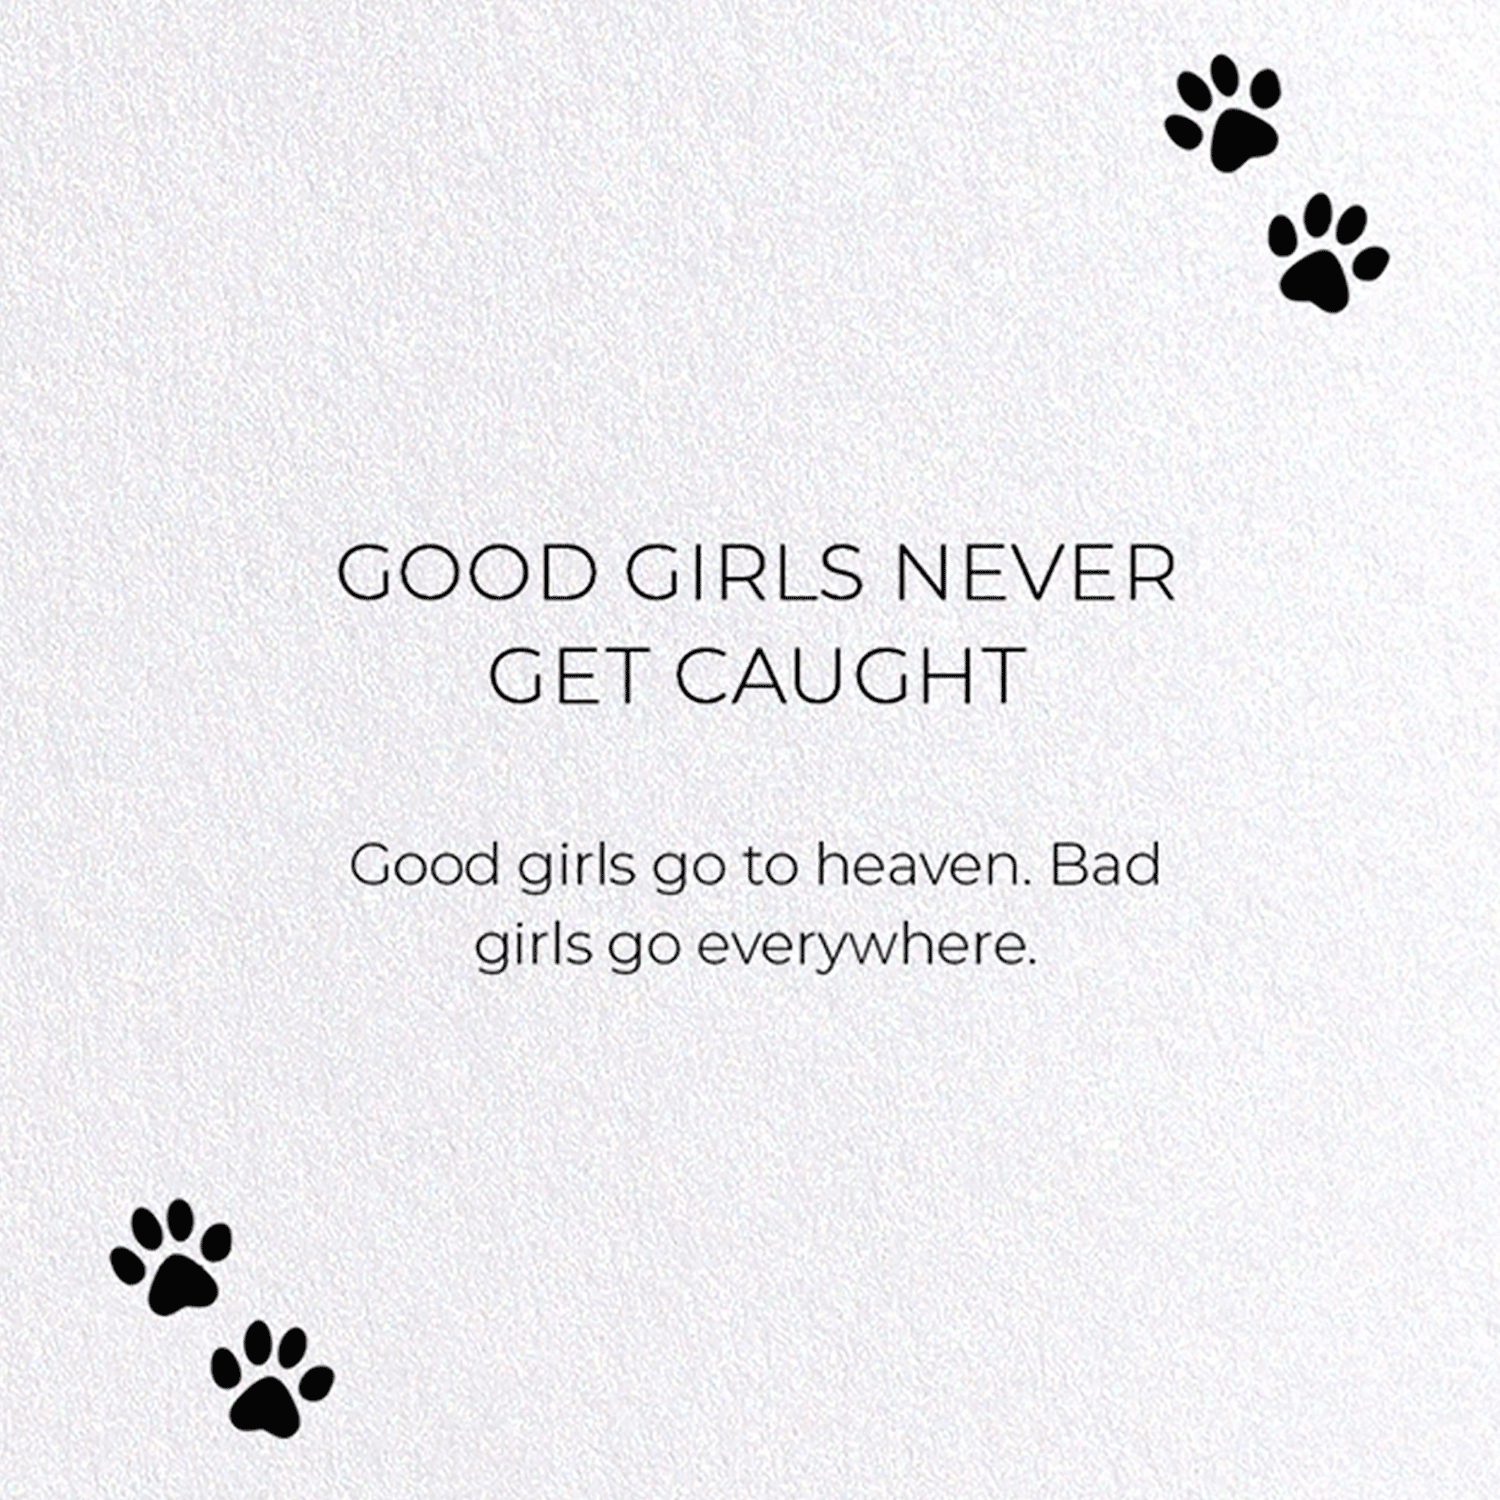 GOOD GIRLS NEVER GET CAUGHT: Funny Animal Greeting Card